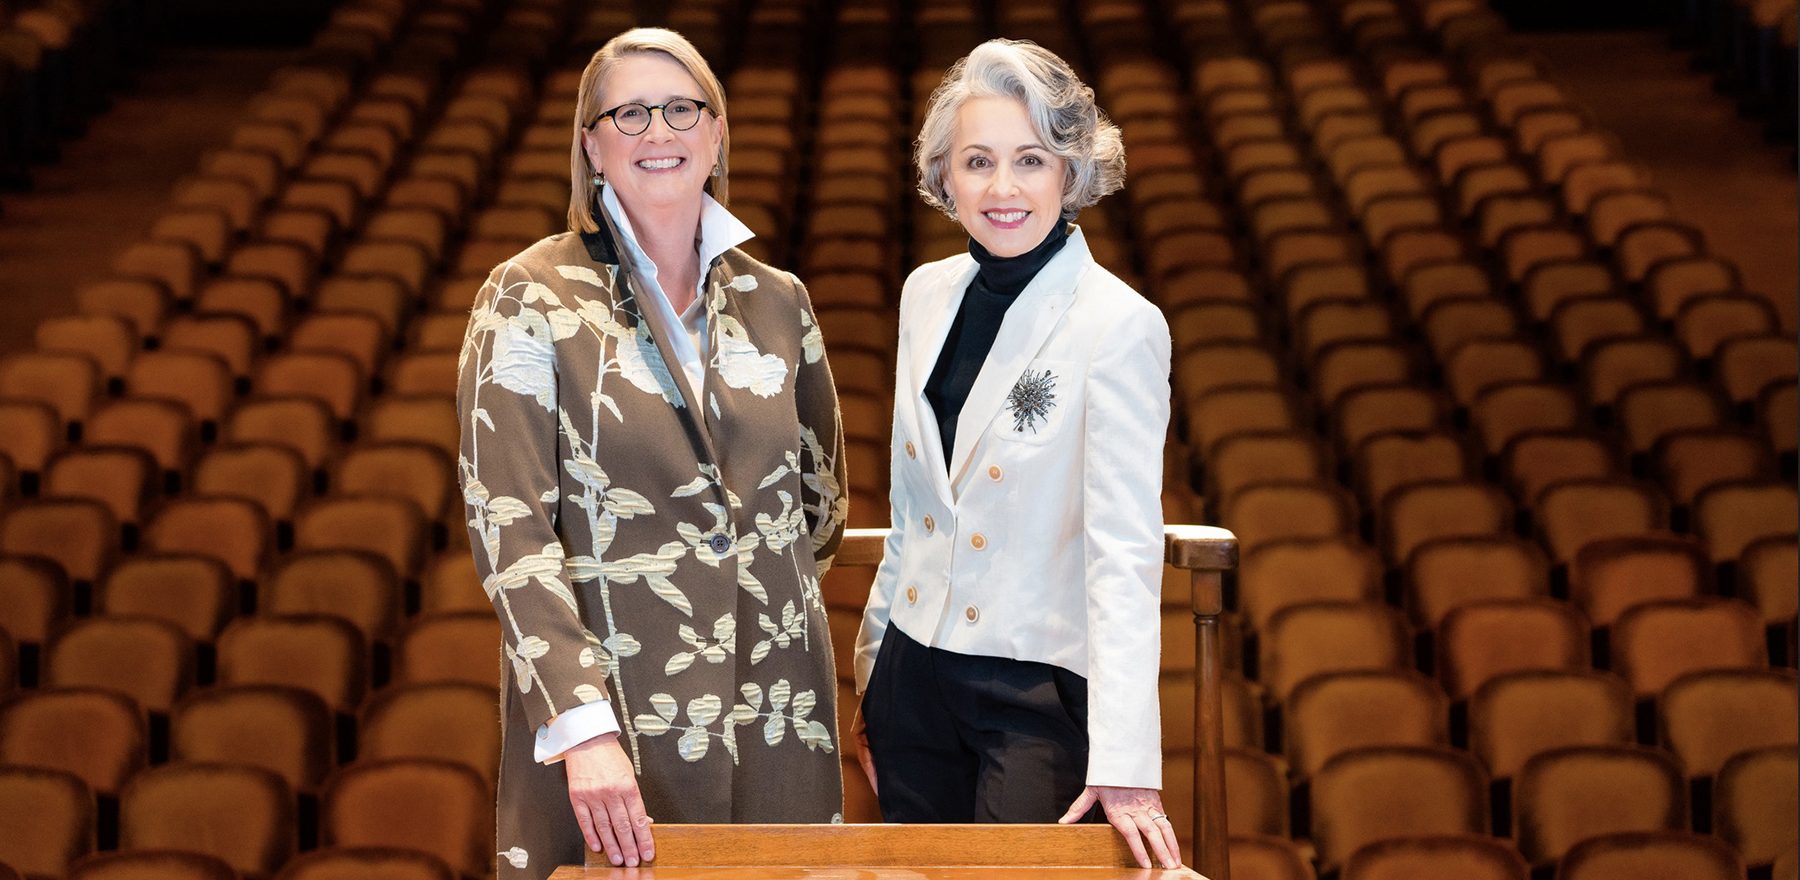 Incoming and outgoing San Francisco Symphony Orchestra board chairs Priscilla Geeslin (left) and Sakurako Fisher (right). Photo by Brandon Patoc.